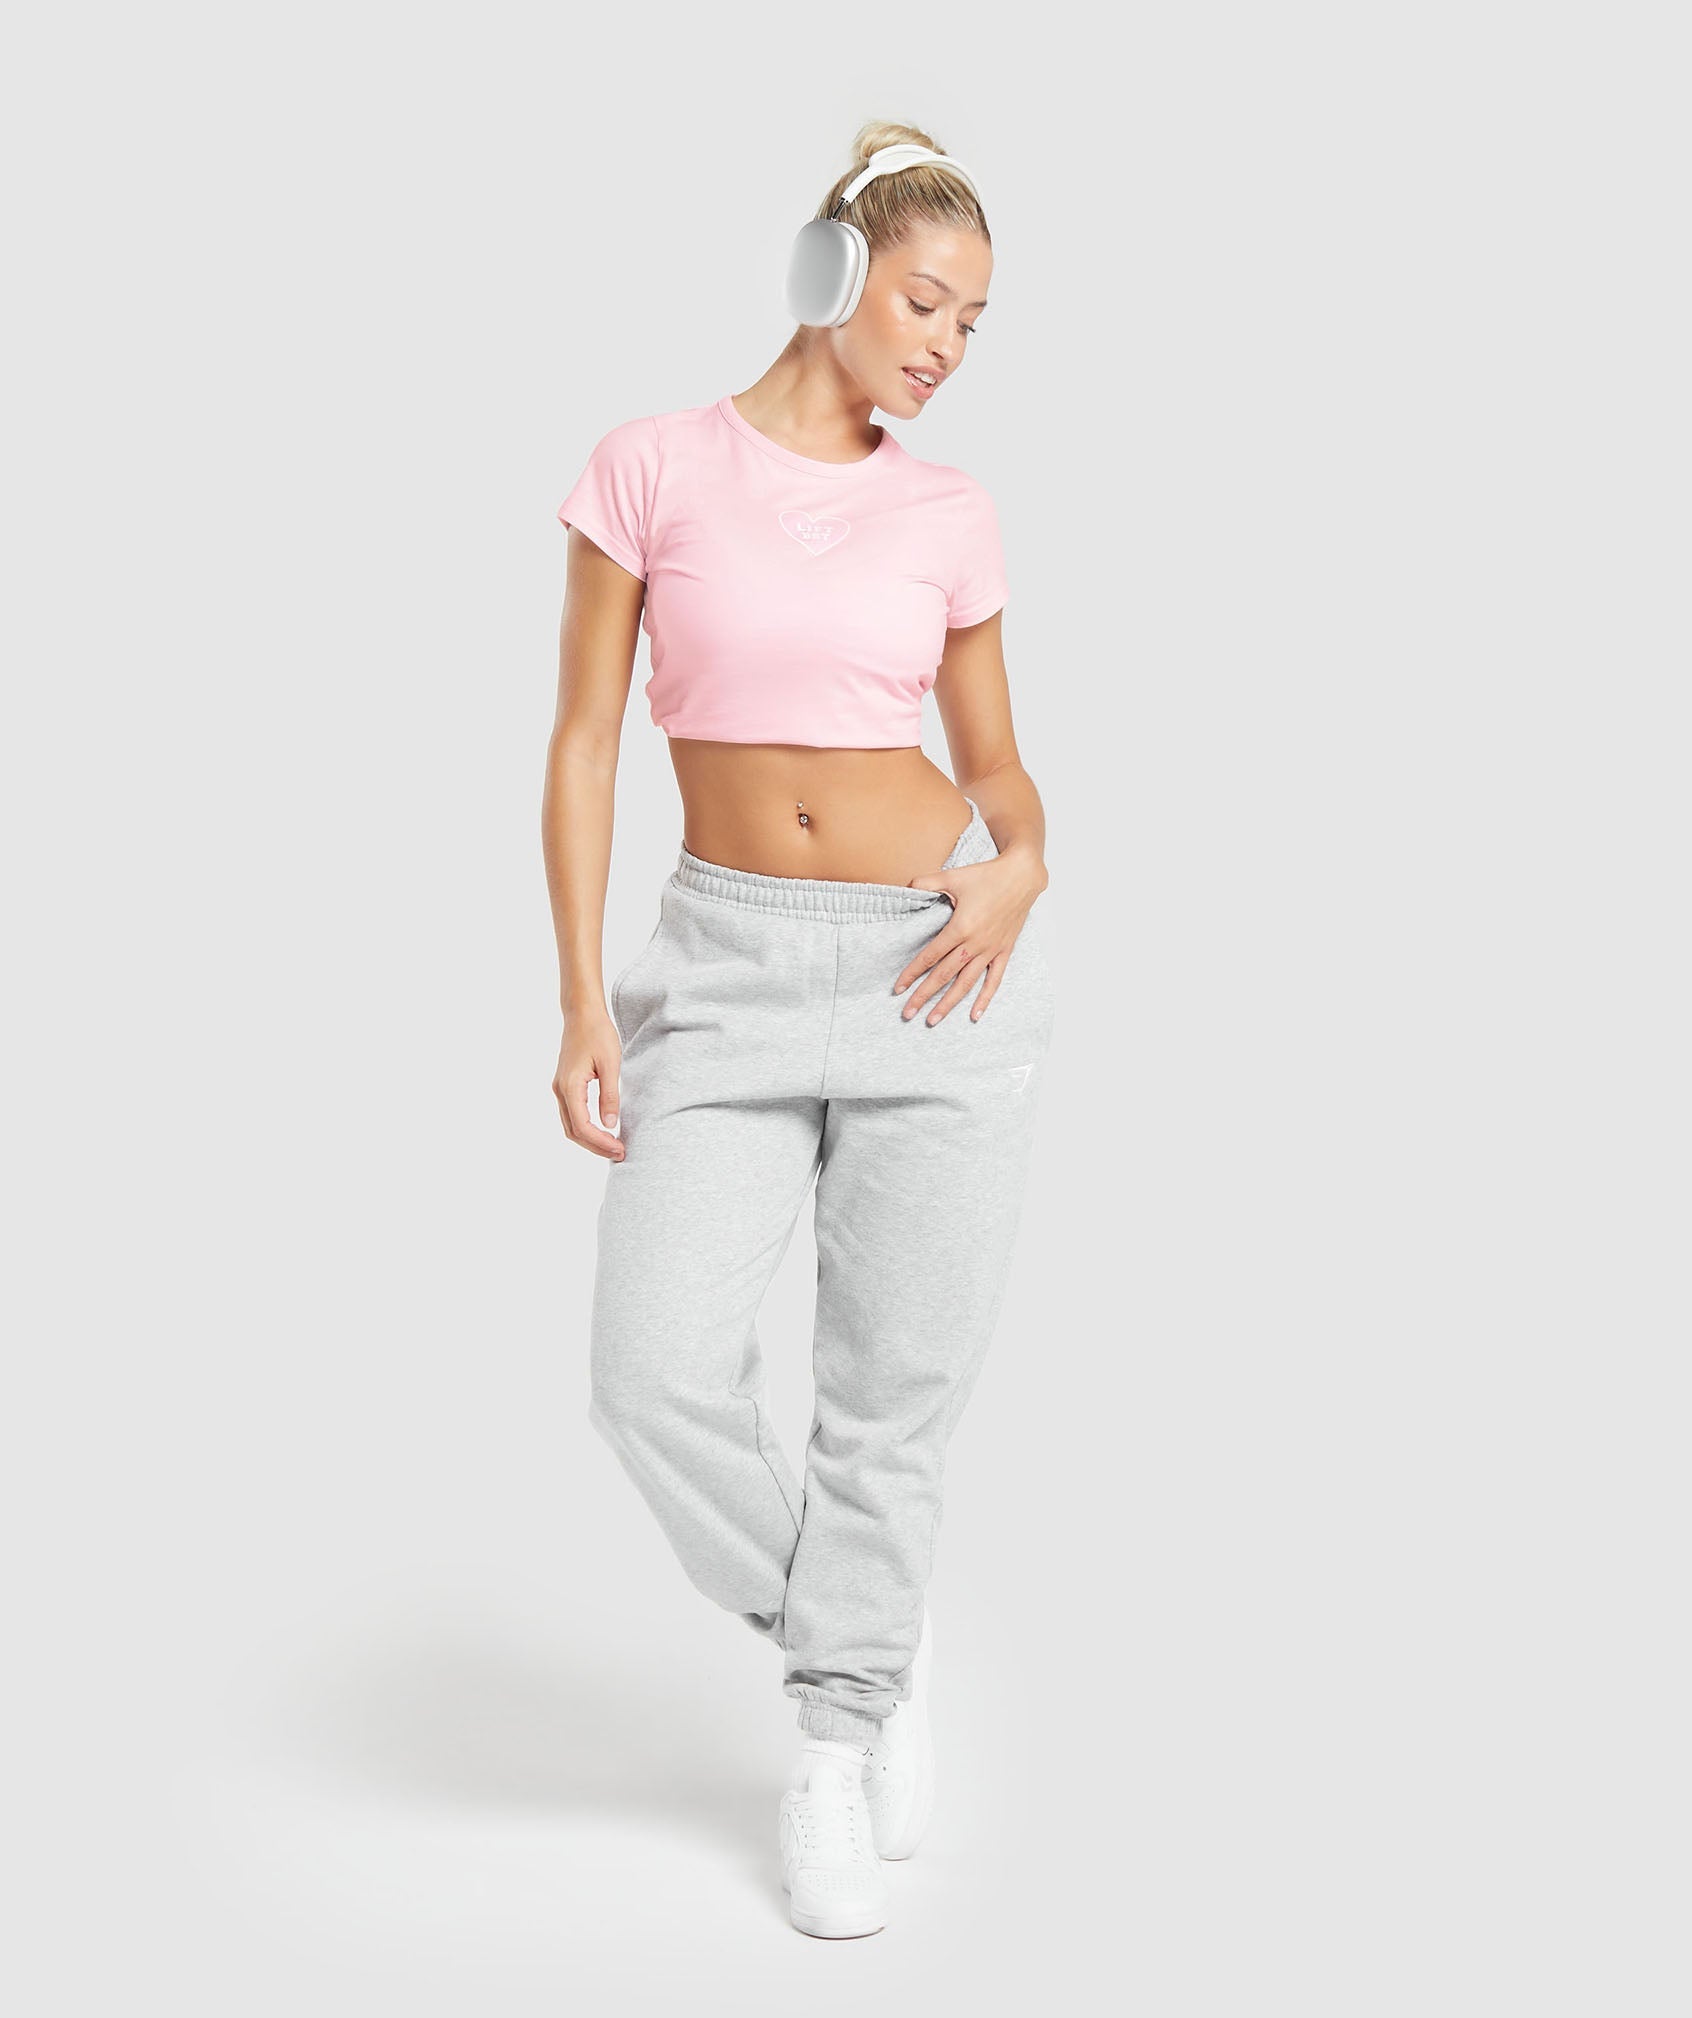 Love Hearts Crop Top in Dolly Pink - view 4